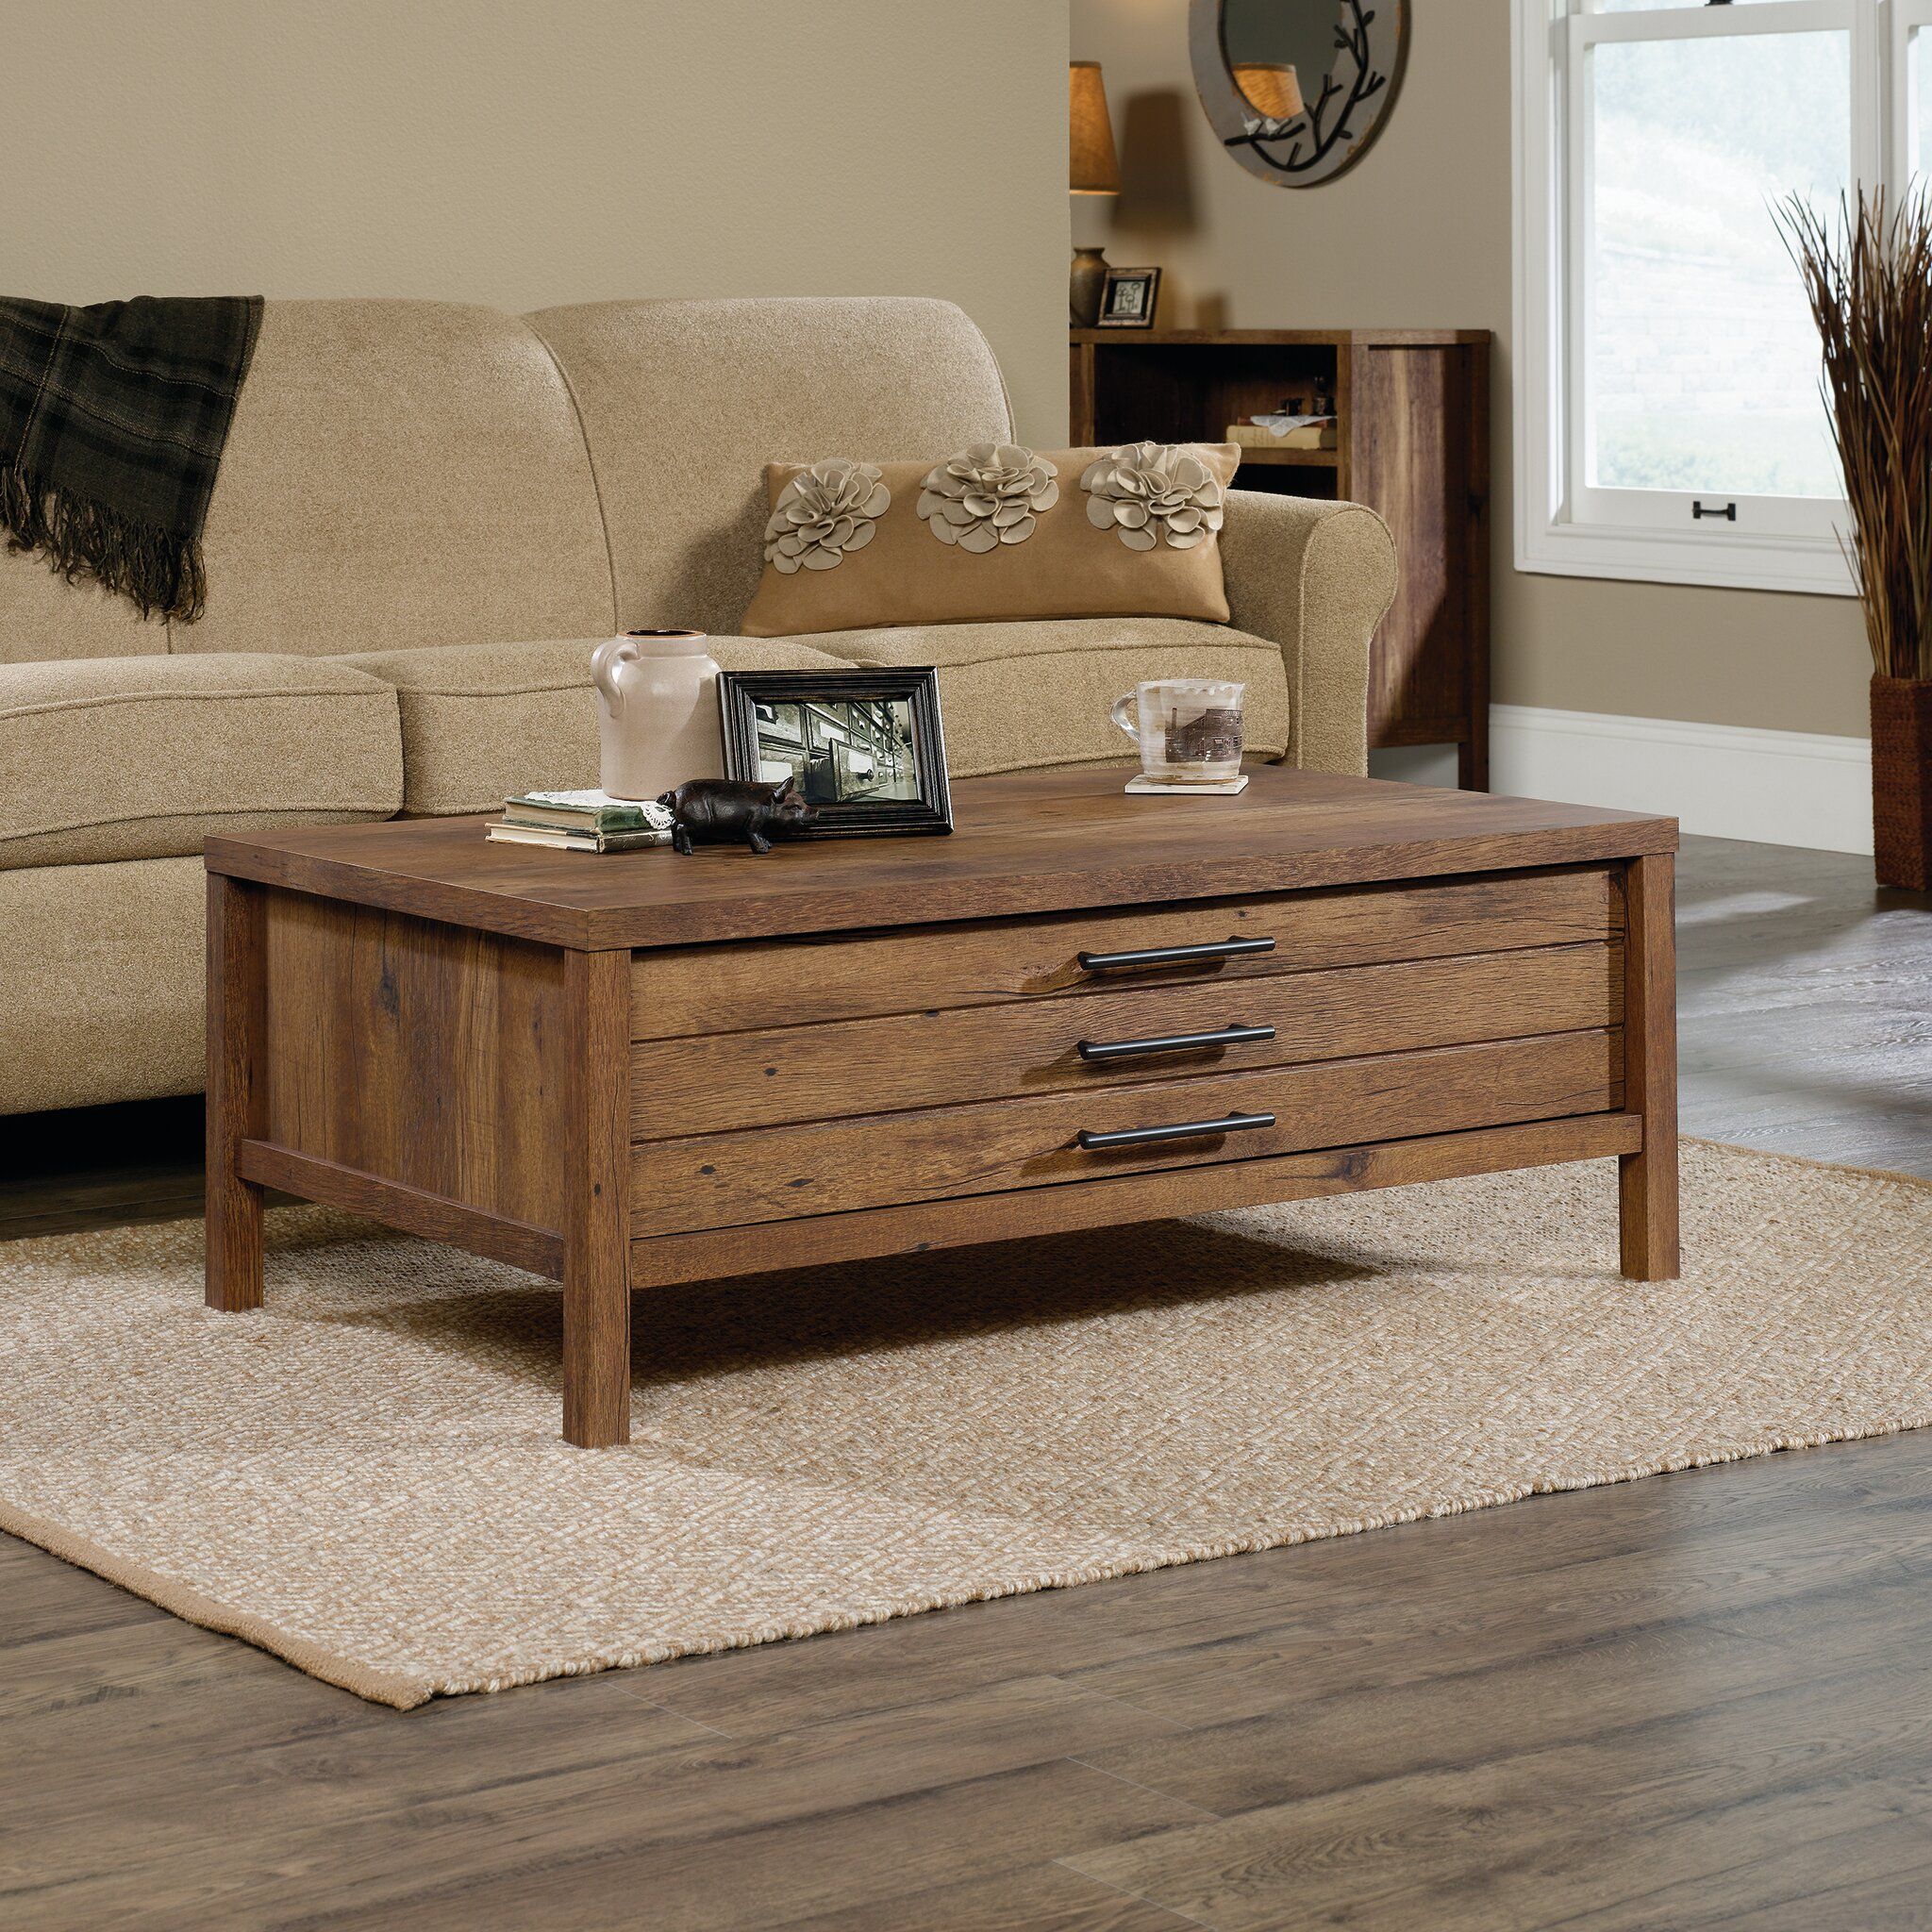 Laurel Foundry Modern Farmhouse Odile Coffee Table & Reviews | Wayfair Intended For Modern Farmhouse Coffee Table Sets (View 11 of 20)